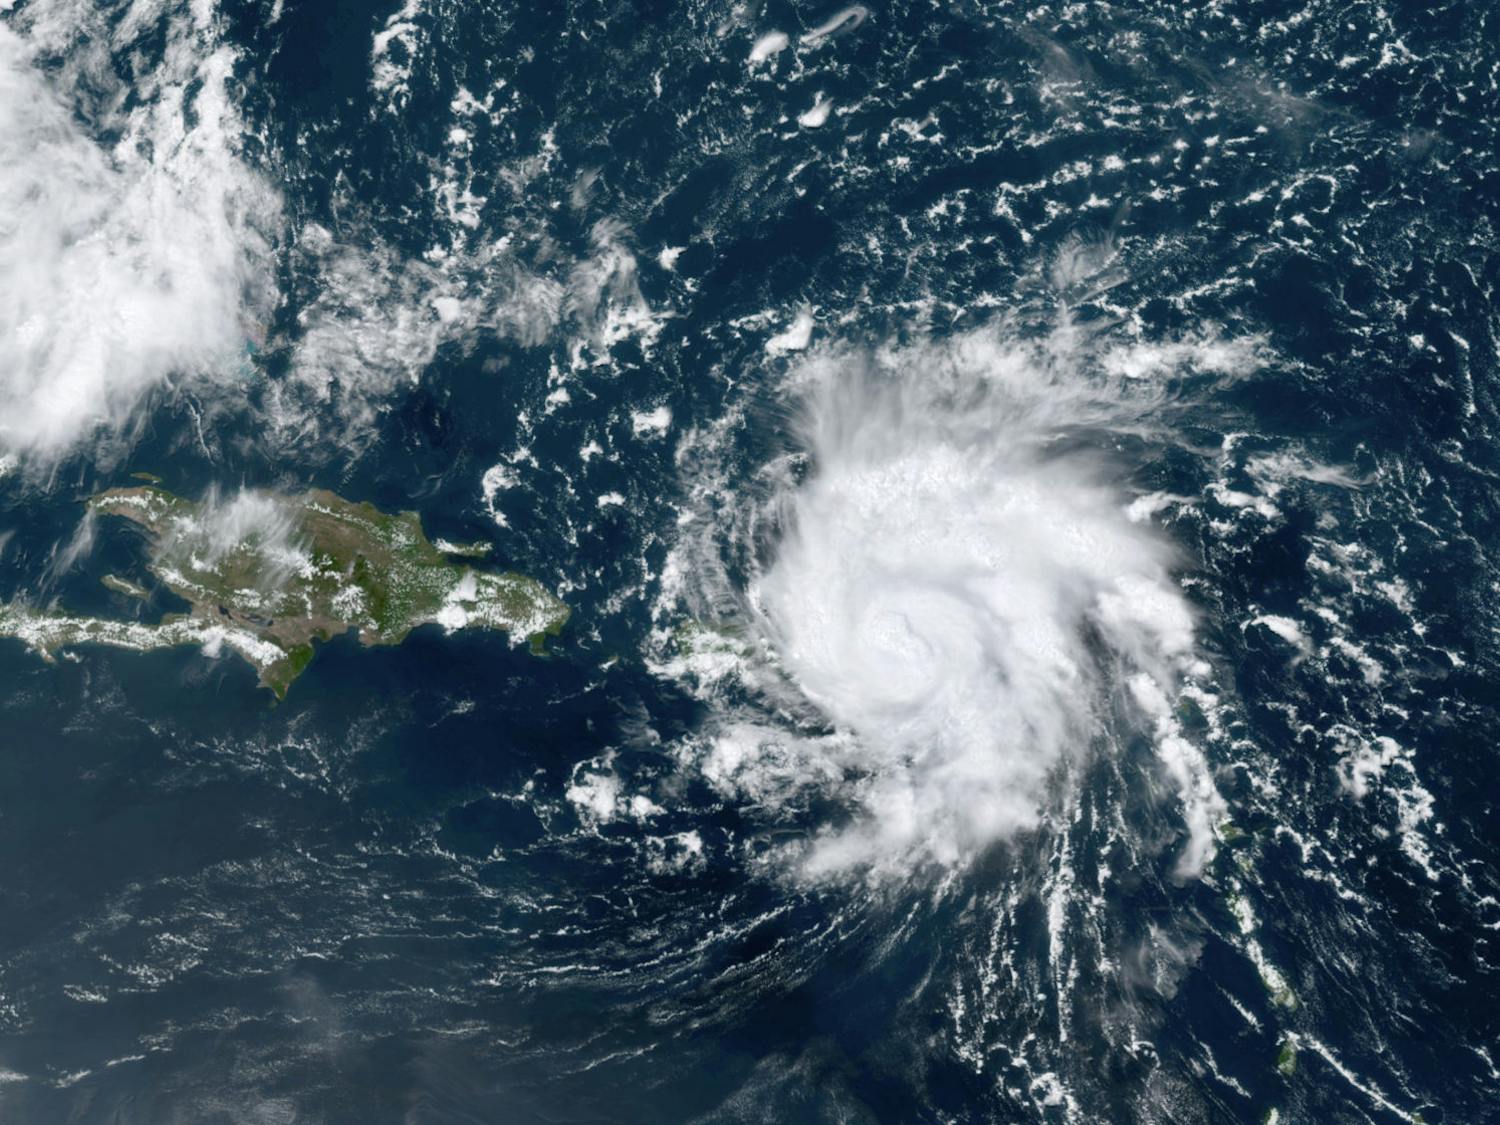 This GOES-16 satellite image taken Wednesday, Aug. 28, 209, at 17:20 UTC and provided by National Oceanic and Atmospheric Administration (NOAA), shows Dorian, a Category 1 hurricane, crossing over the U.S. and British Virgin Islands. Forecasters say it could grow to Category 3 status as it nears the U.S. mainland as early as the weekend. (NOAA via AP)